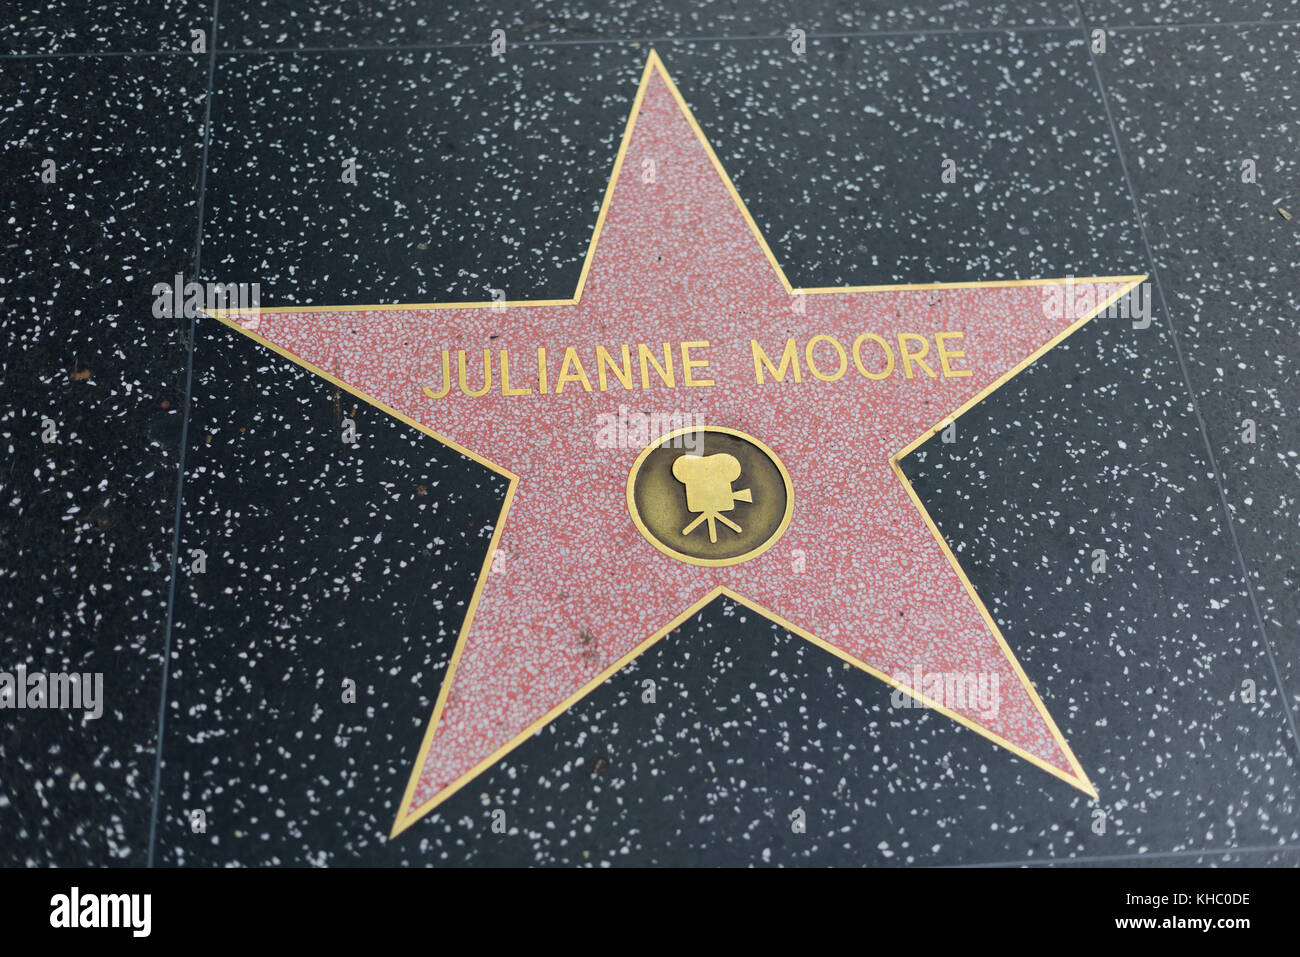 HOLLYWOOD, CA - DICEMBRE 06: Julianne Moore star sulla Hollywood Walk of Fame a Hollywood, California, il giorno Foto Stock